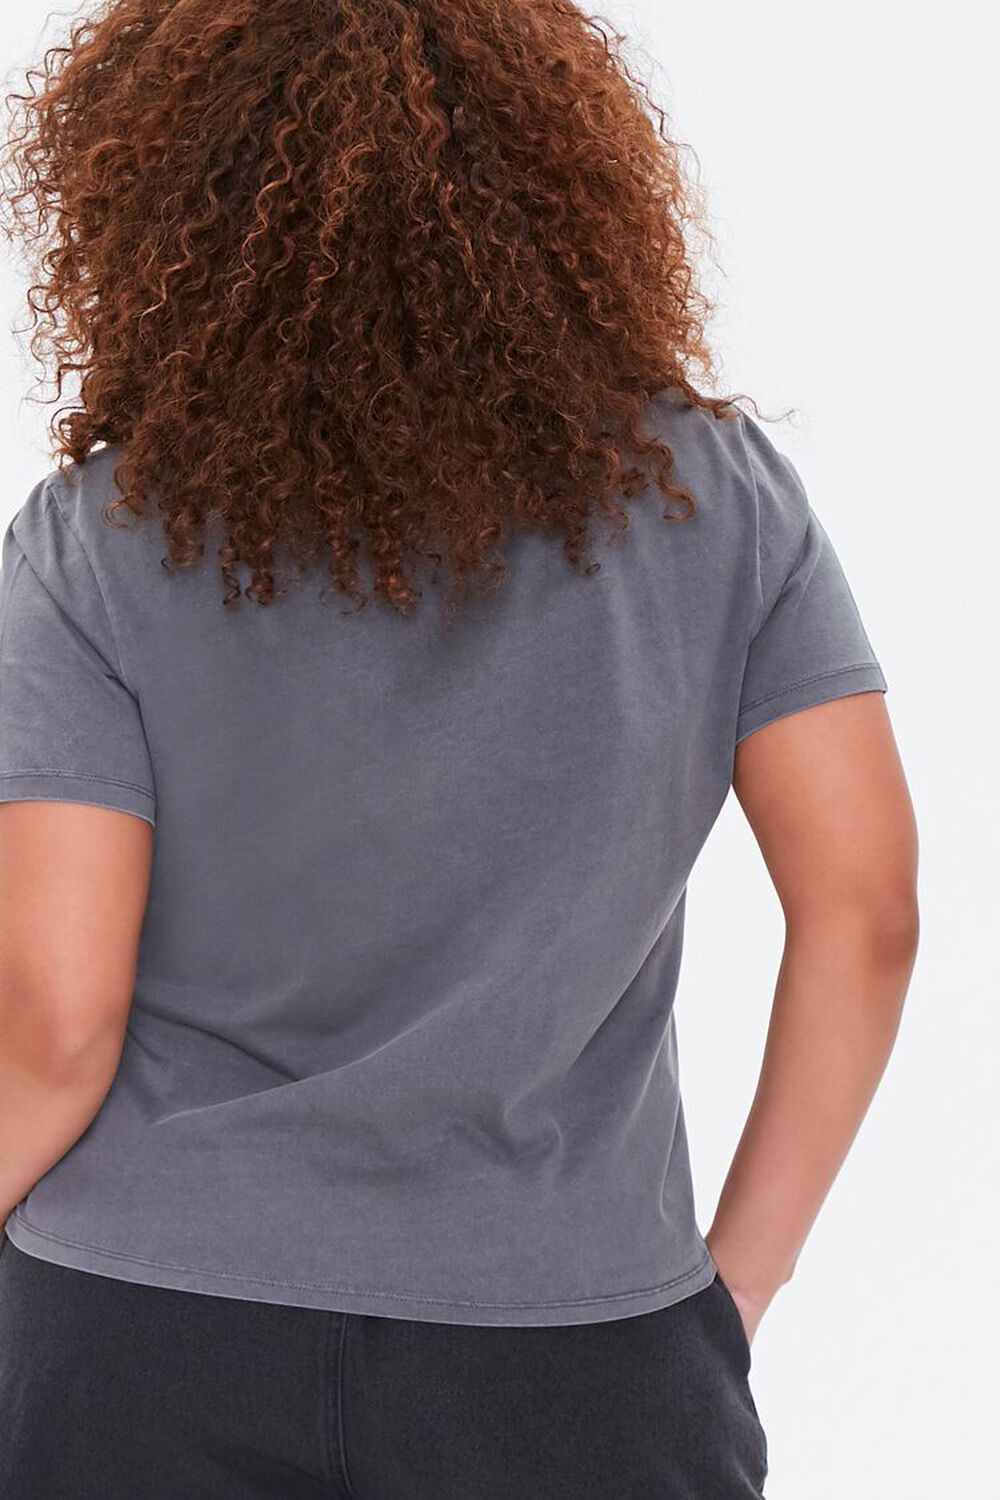 CHARCOAL Plus Size Mineral Wash Tee, image 3